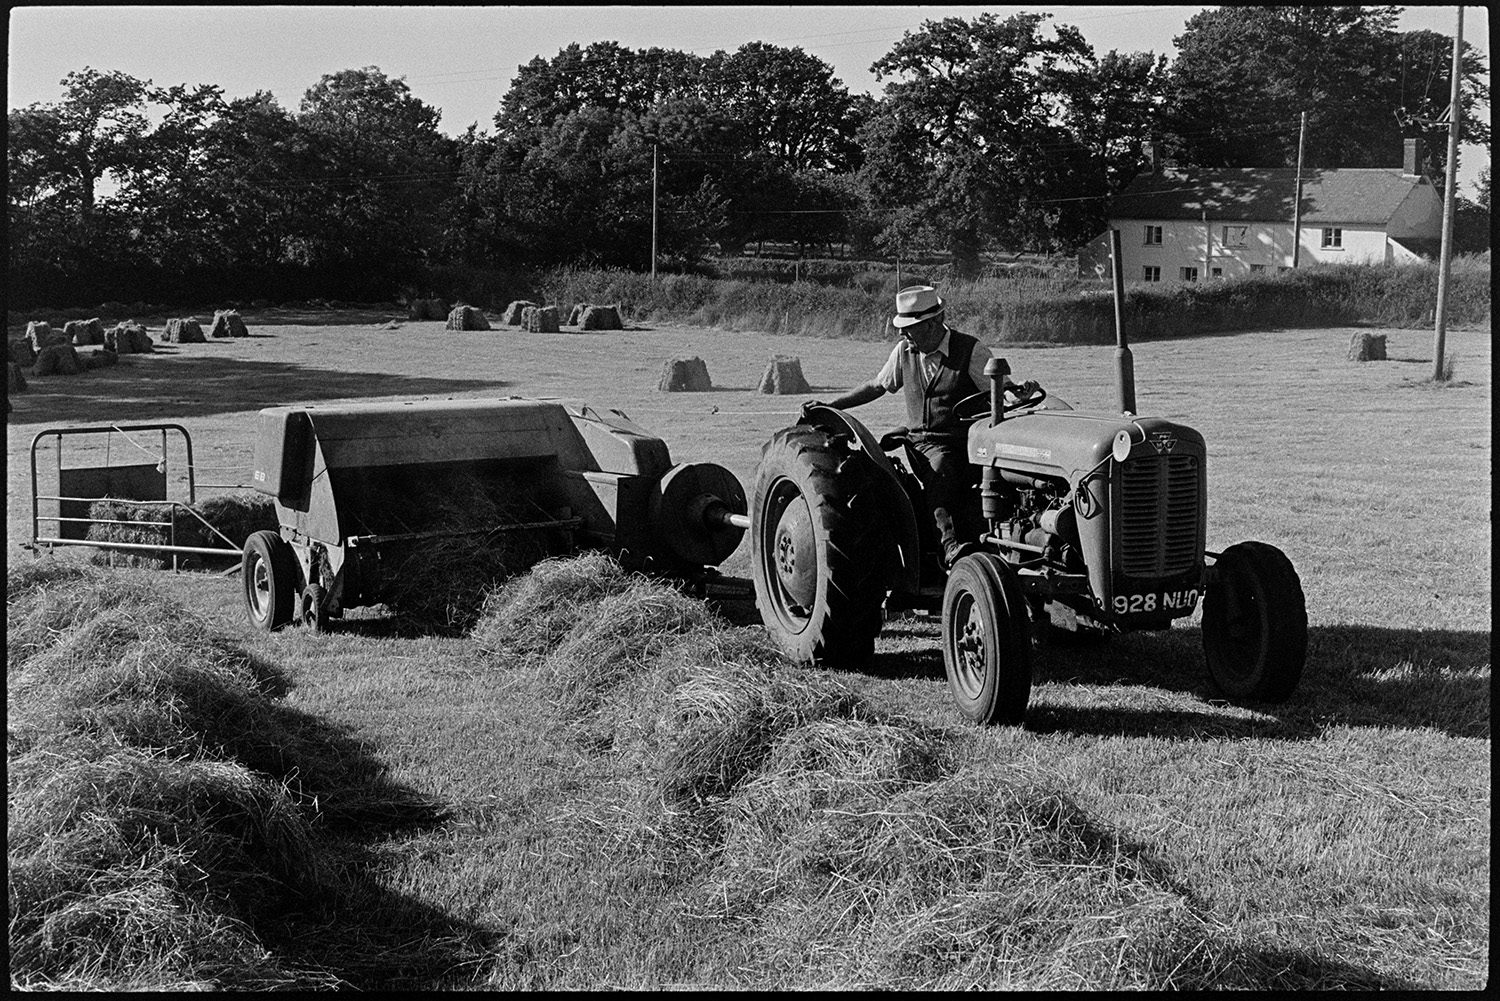 Children watching and helping farmer bale hay. 
[John Ward baling hay with a tractor and baler in a field at Parsonage, Iddesleigh. Stacks of hay bales can be seen in the field in the background.]